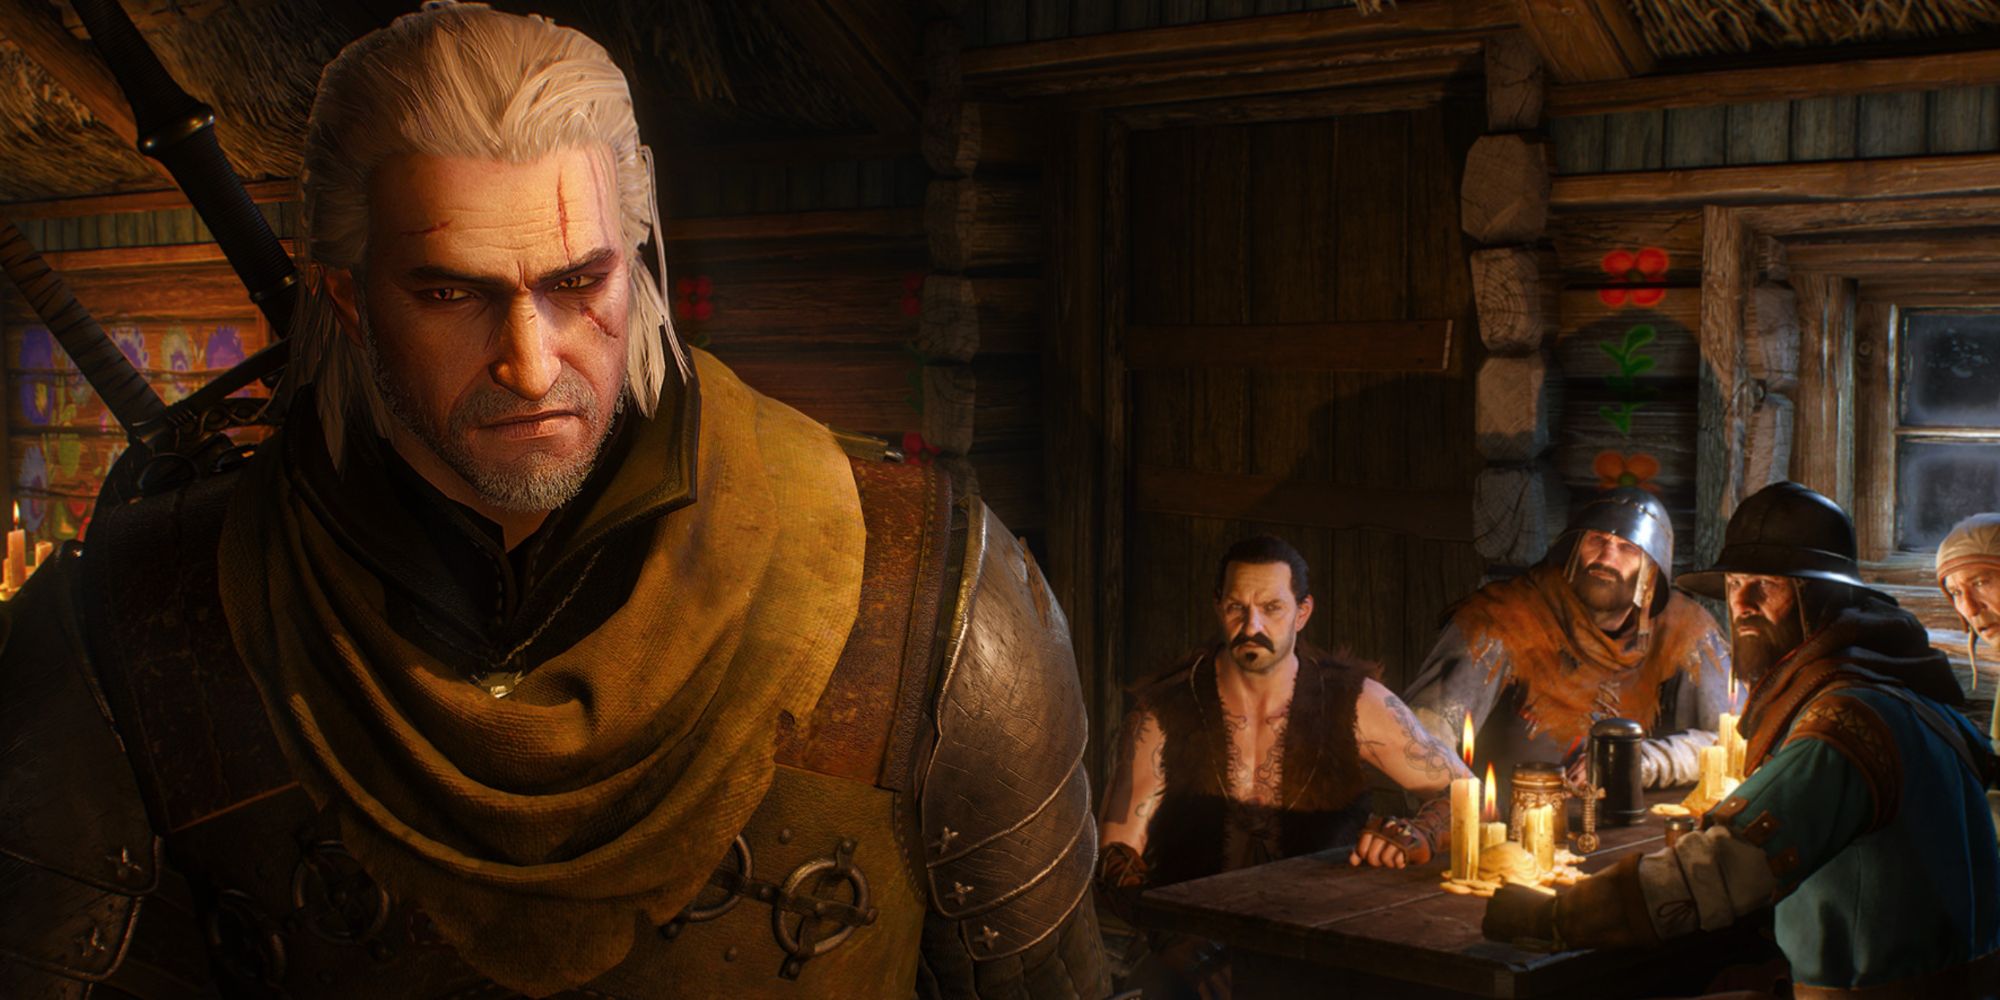 Geralt faces the camera and walks away from a group of thugs in a tavern in The Witcher 3: Wild Hunt